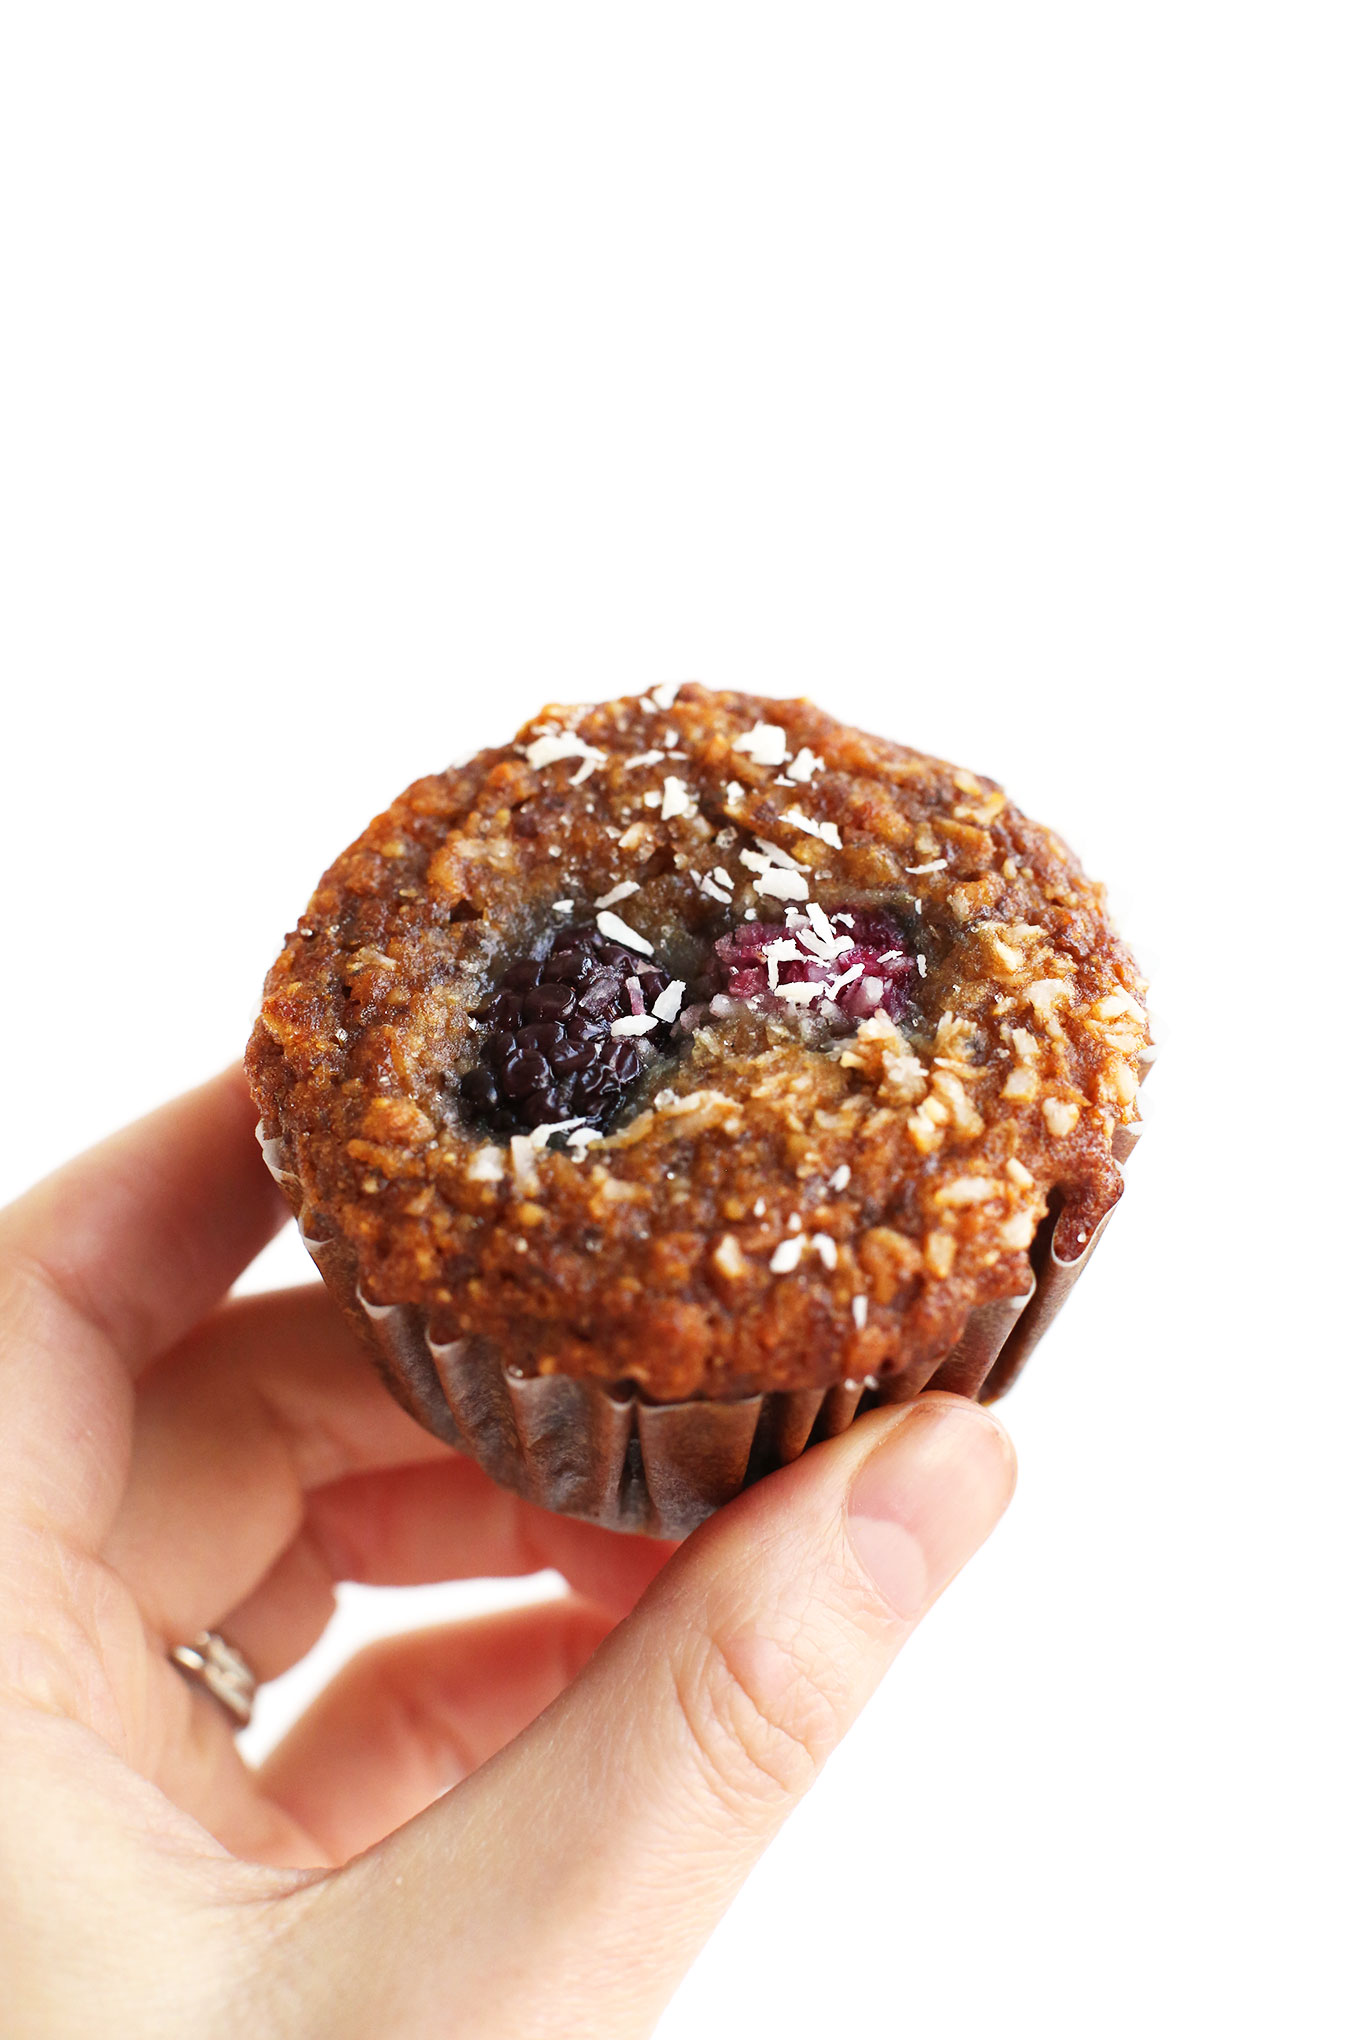 Holding up a Berry Coconut Muffin for a healthy gluten-free vegan snack